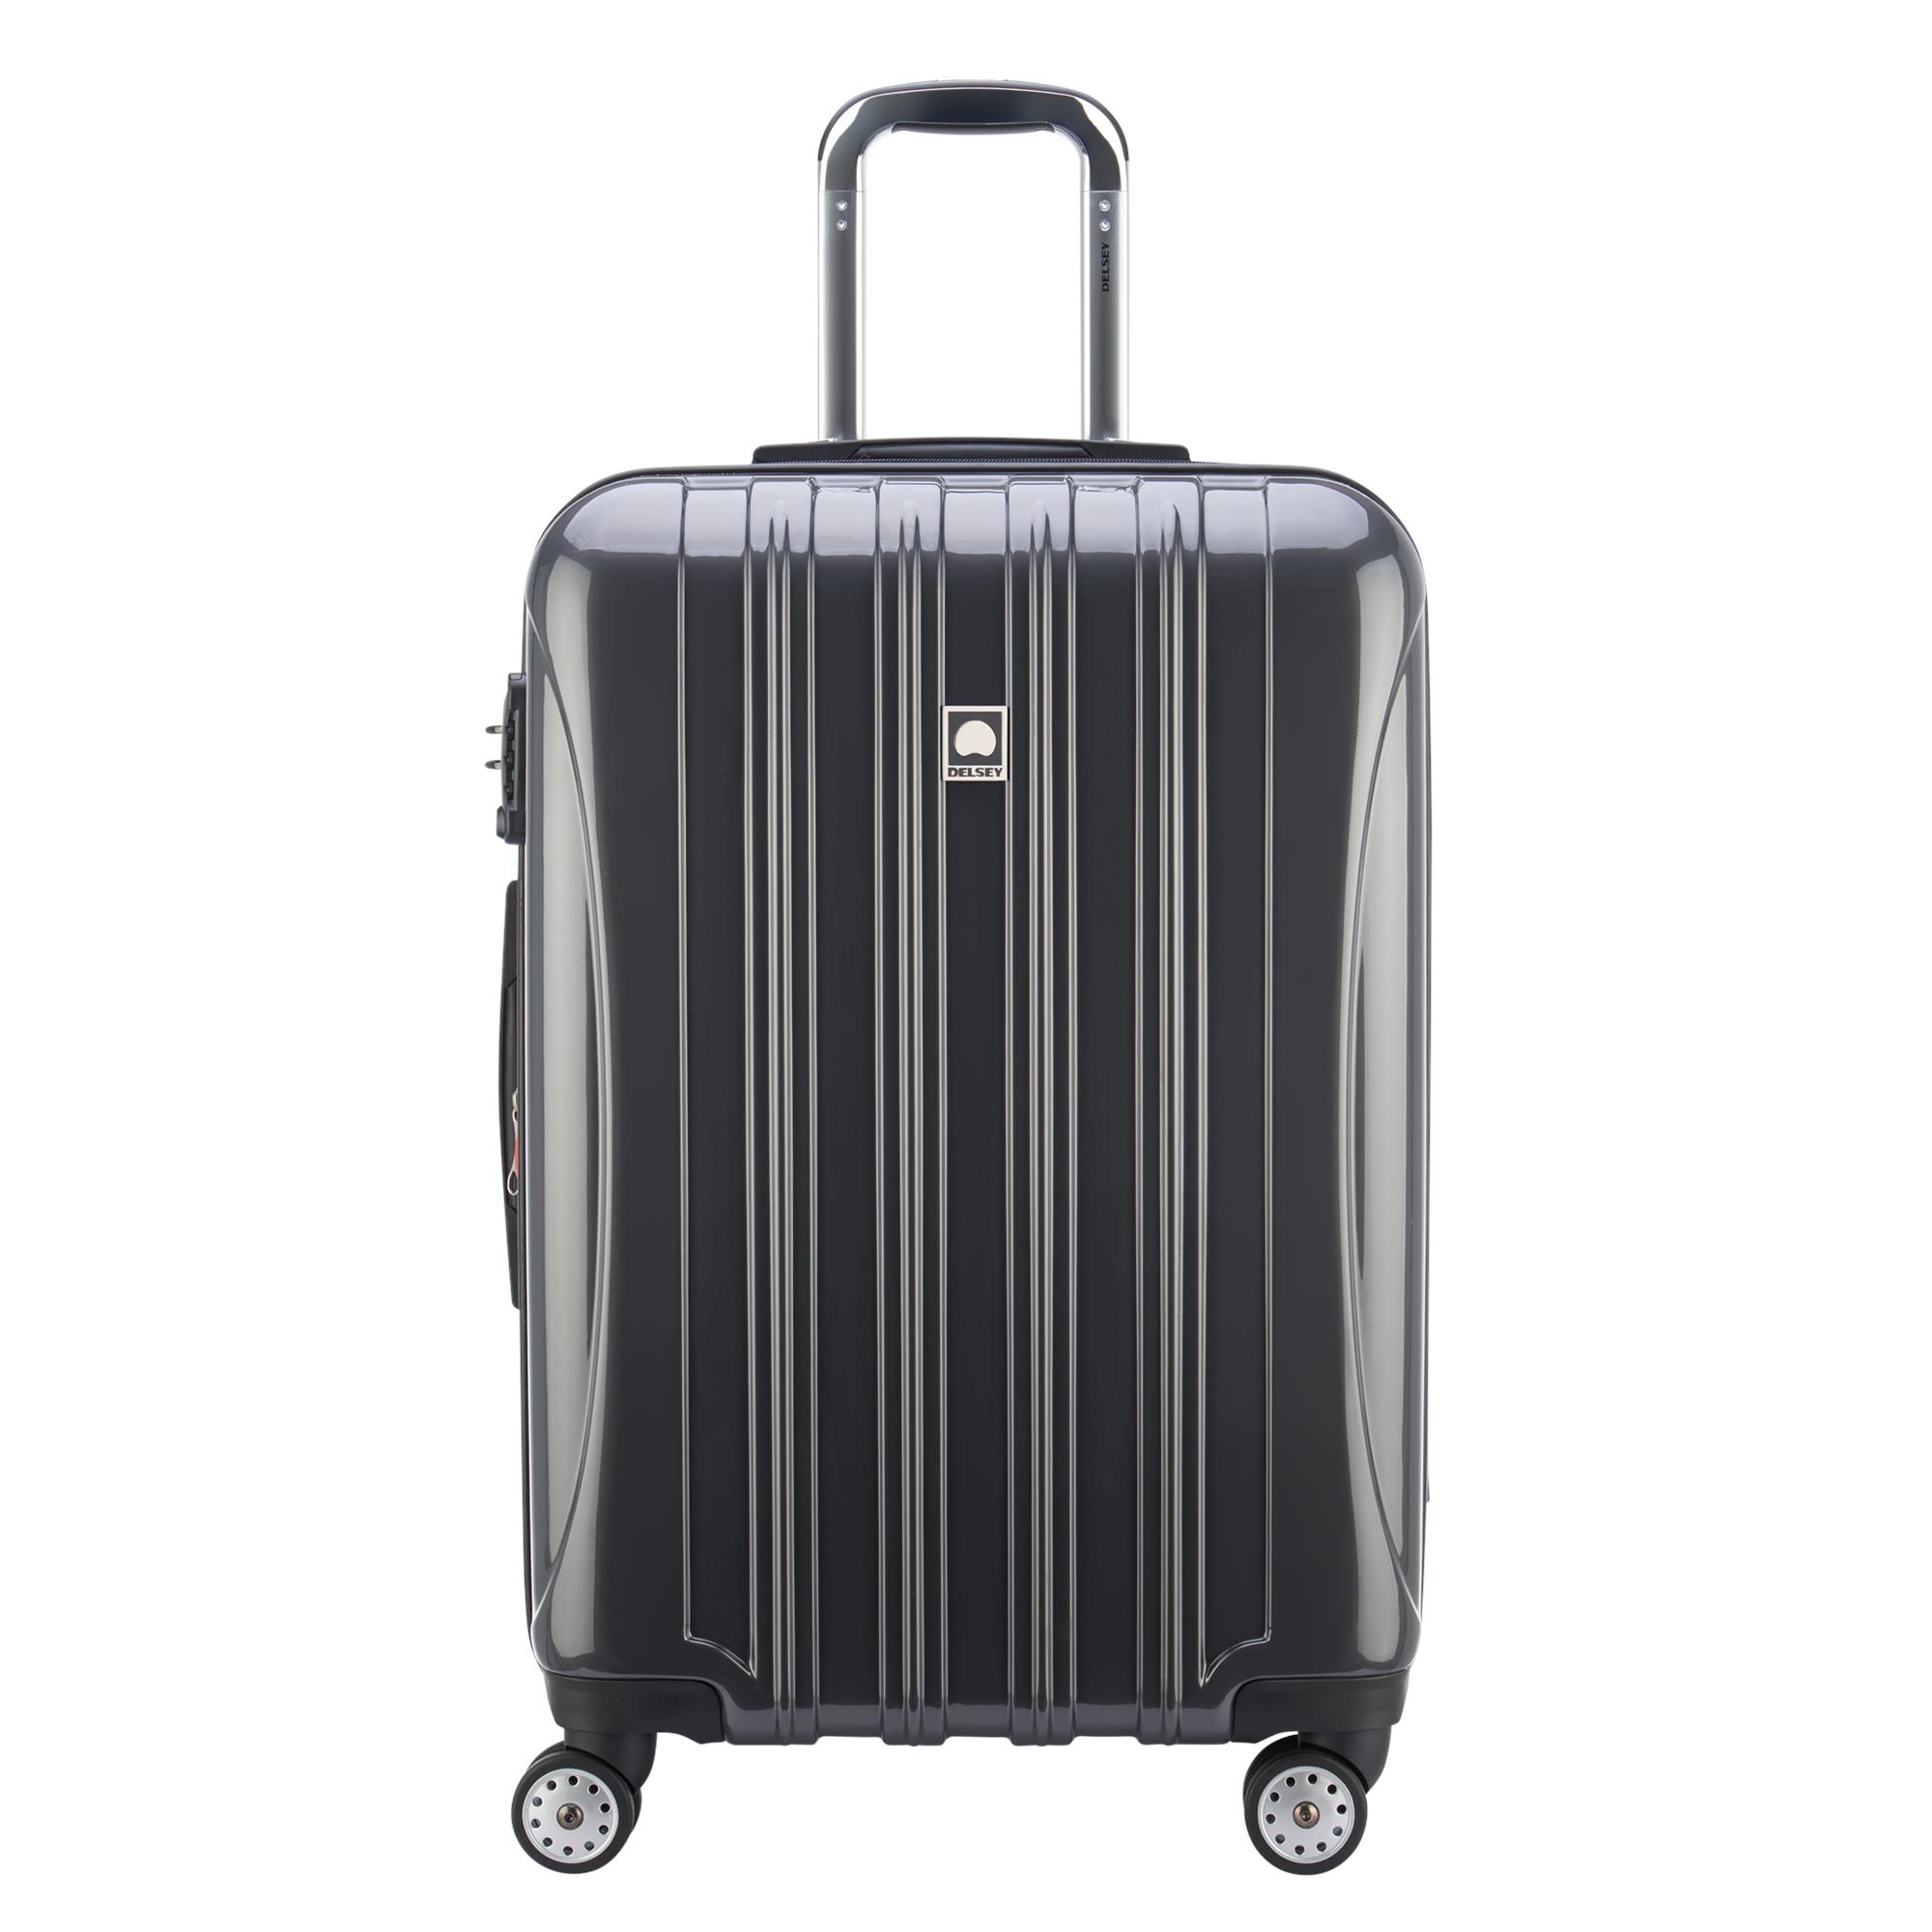 Expandable Spinner Upright Suitcase. Delsey Replacement Wheel. Чемодан Expander. Чемодан Expander maracar.